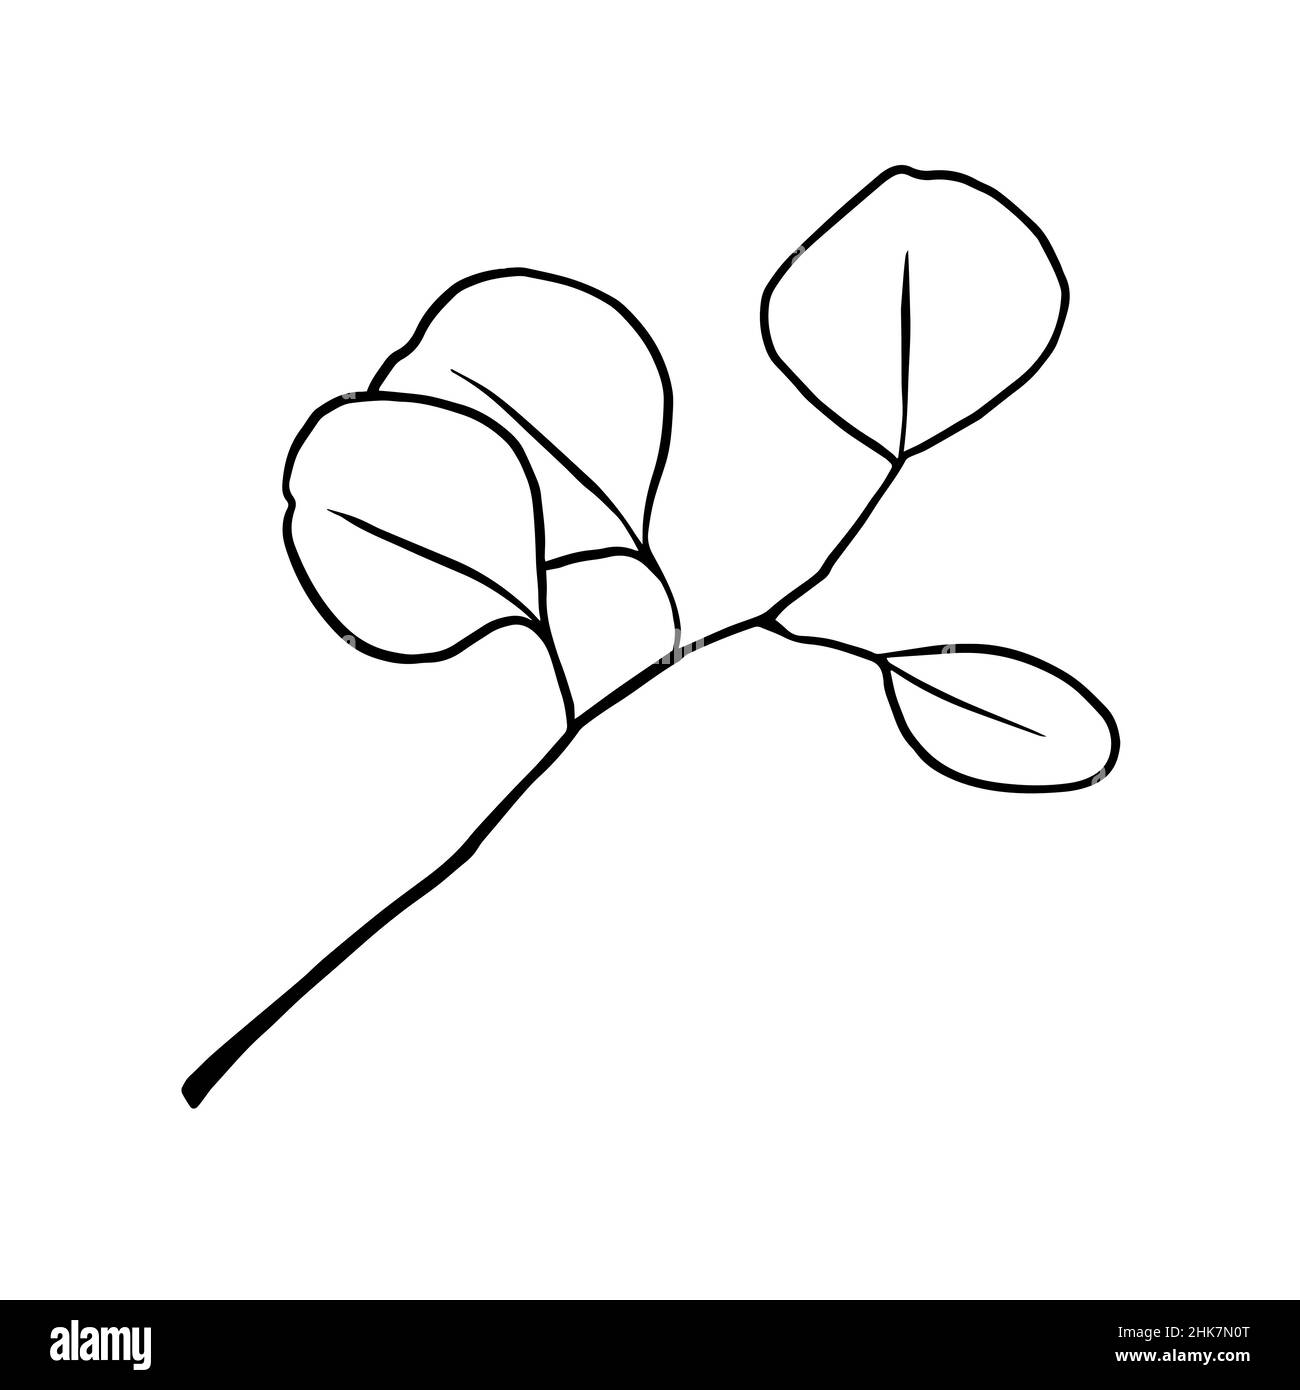 Isolated eucalyptus branch on white background. Contour drawing by hand. Doodle Style Stock Vector